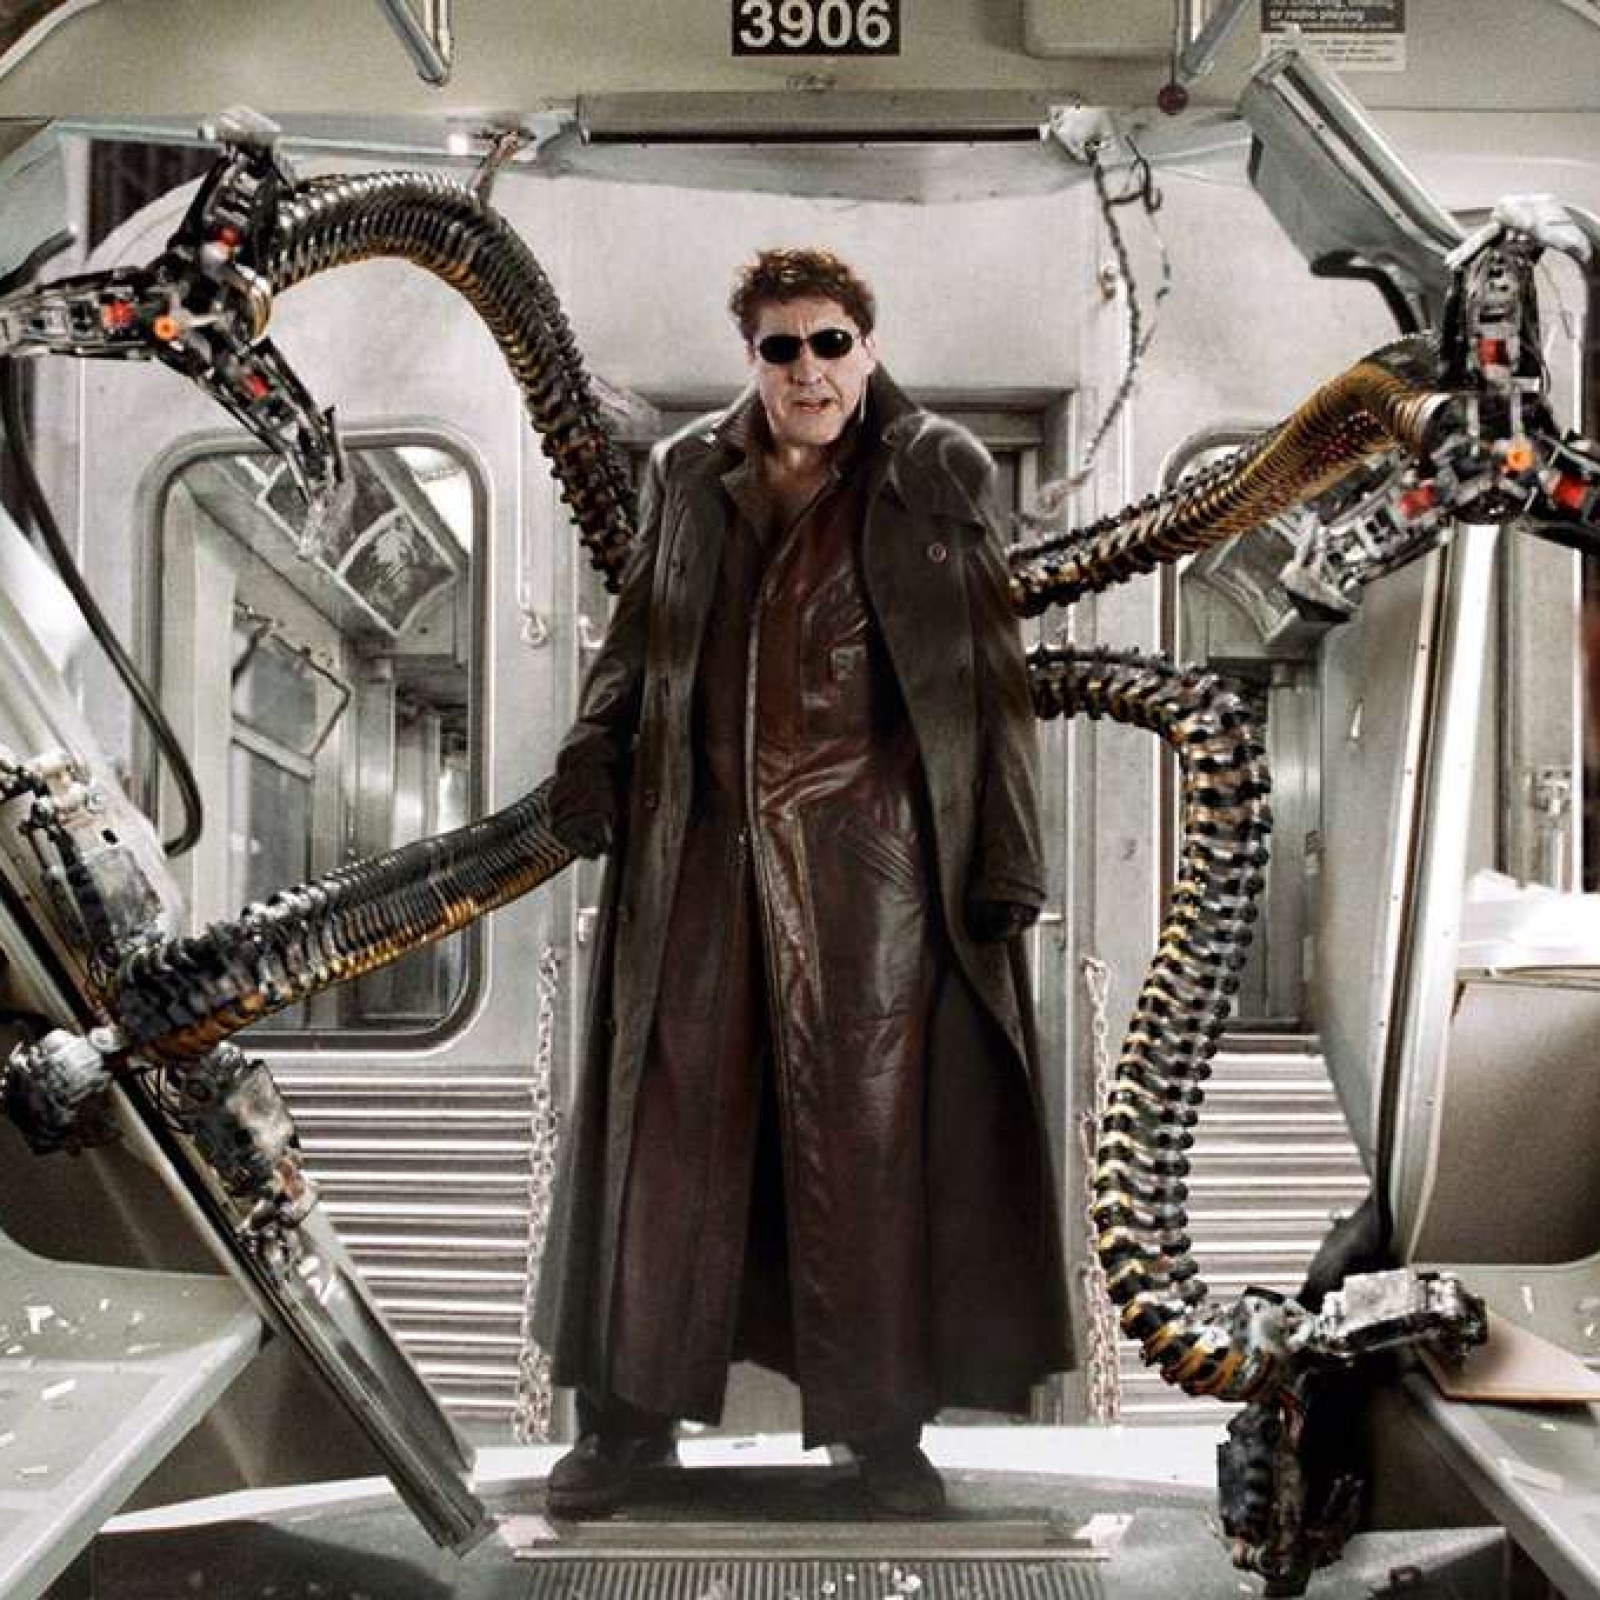 Alfred Molina confirms return as Doctor Octopus in new 'Spider-Man' film -  Sentinelassam